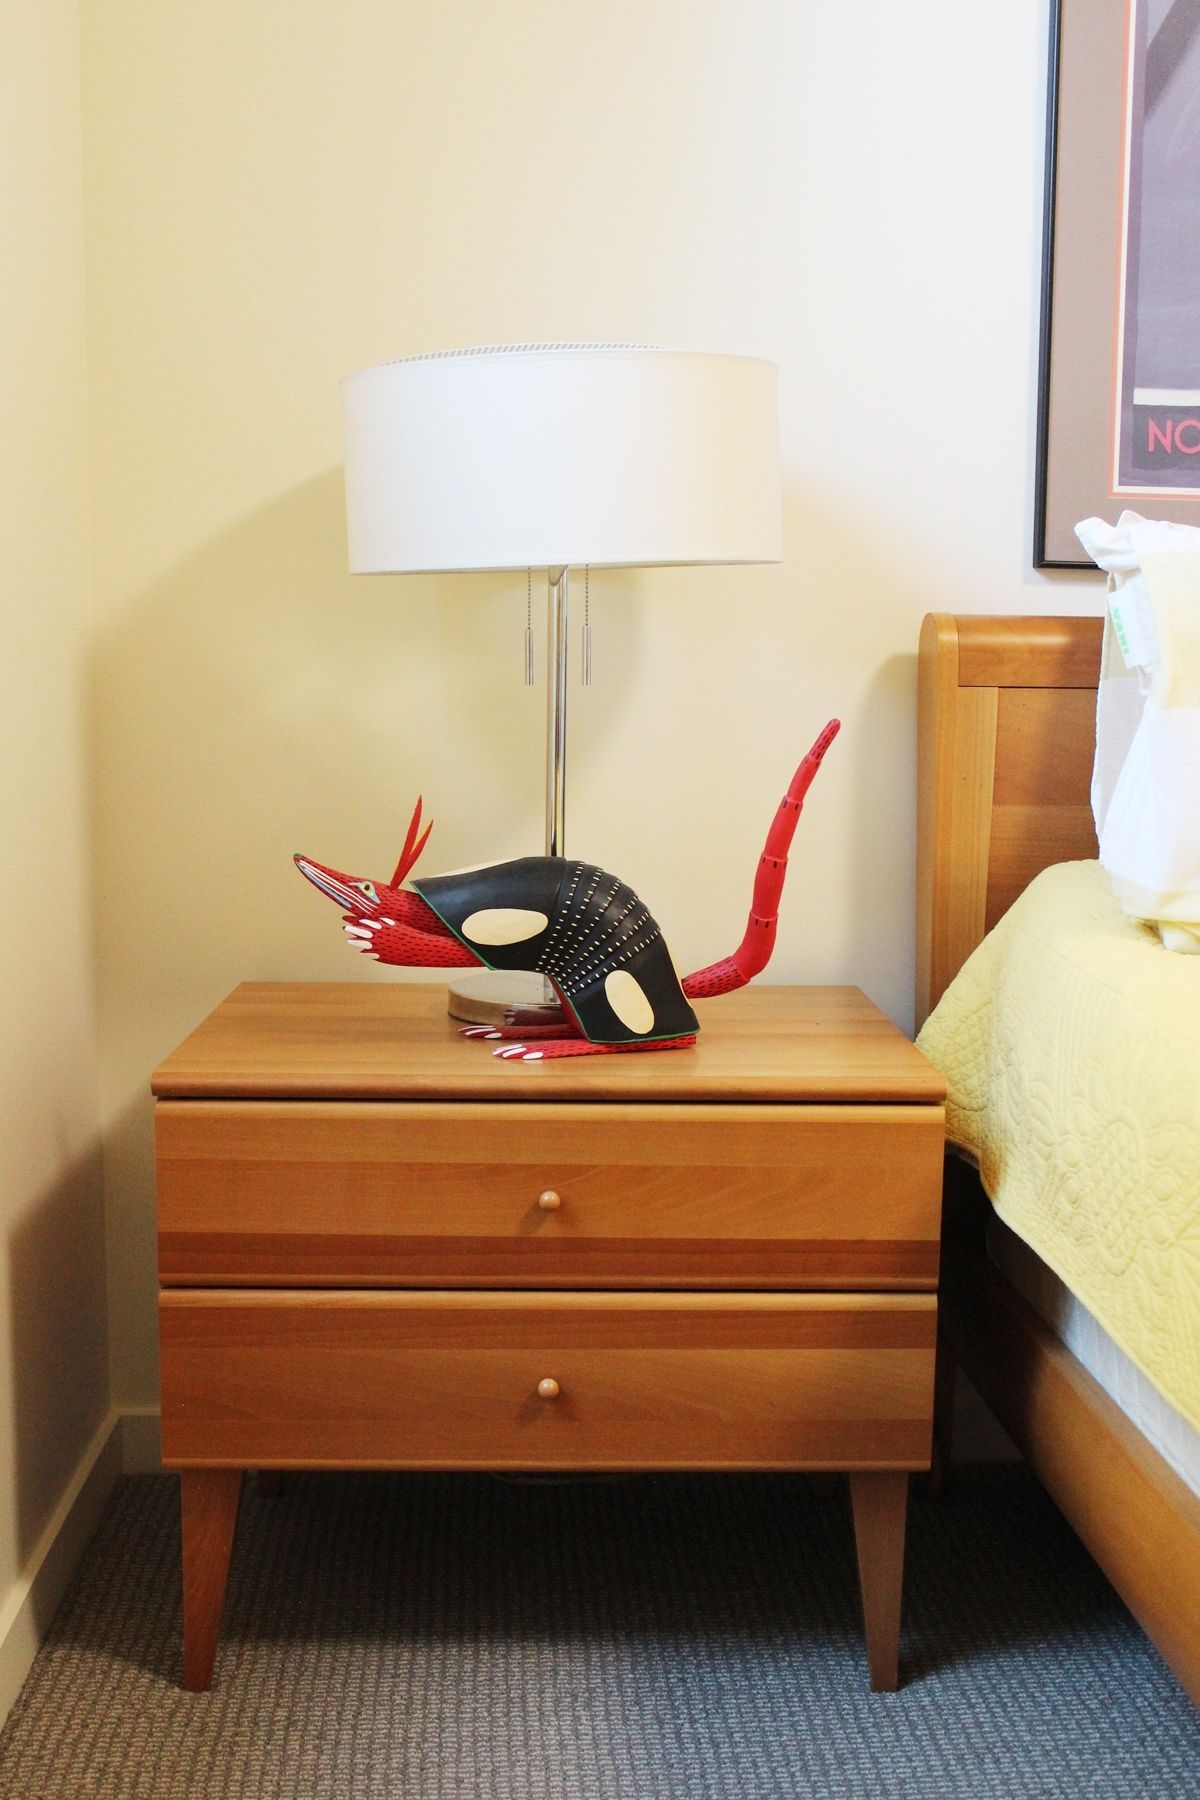 How to decorate a bedroom - nightstand houses an oversized animal